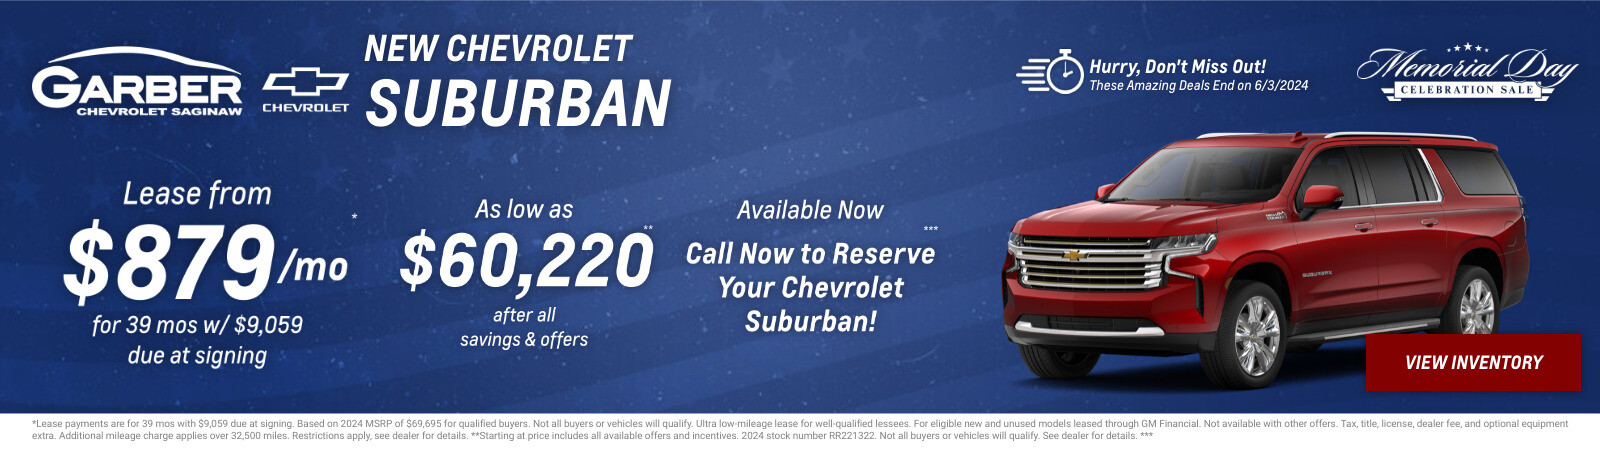 New Chevrolet Suburban Current Deals and Offers in Saginaw, MI